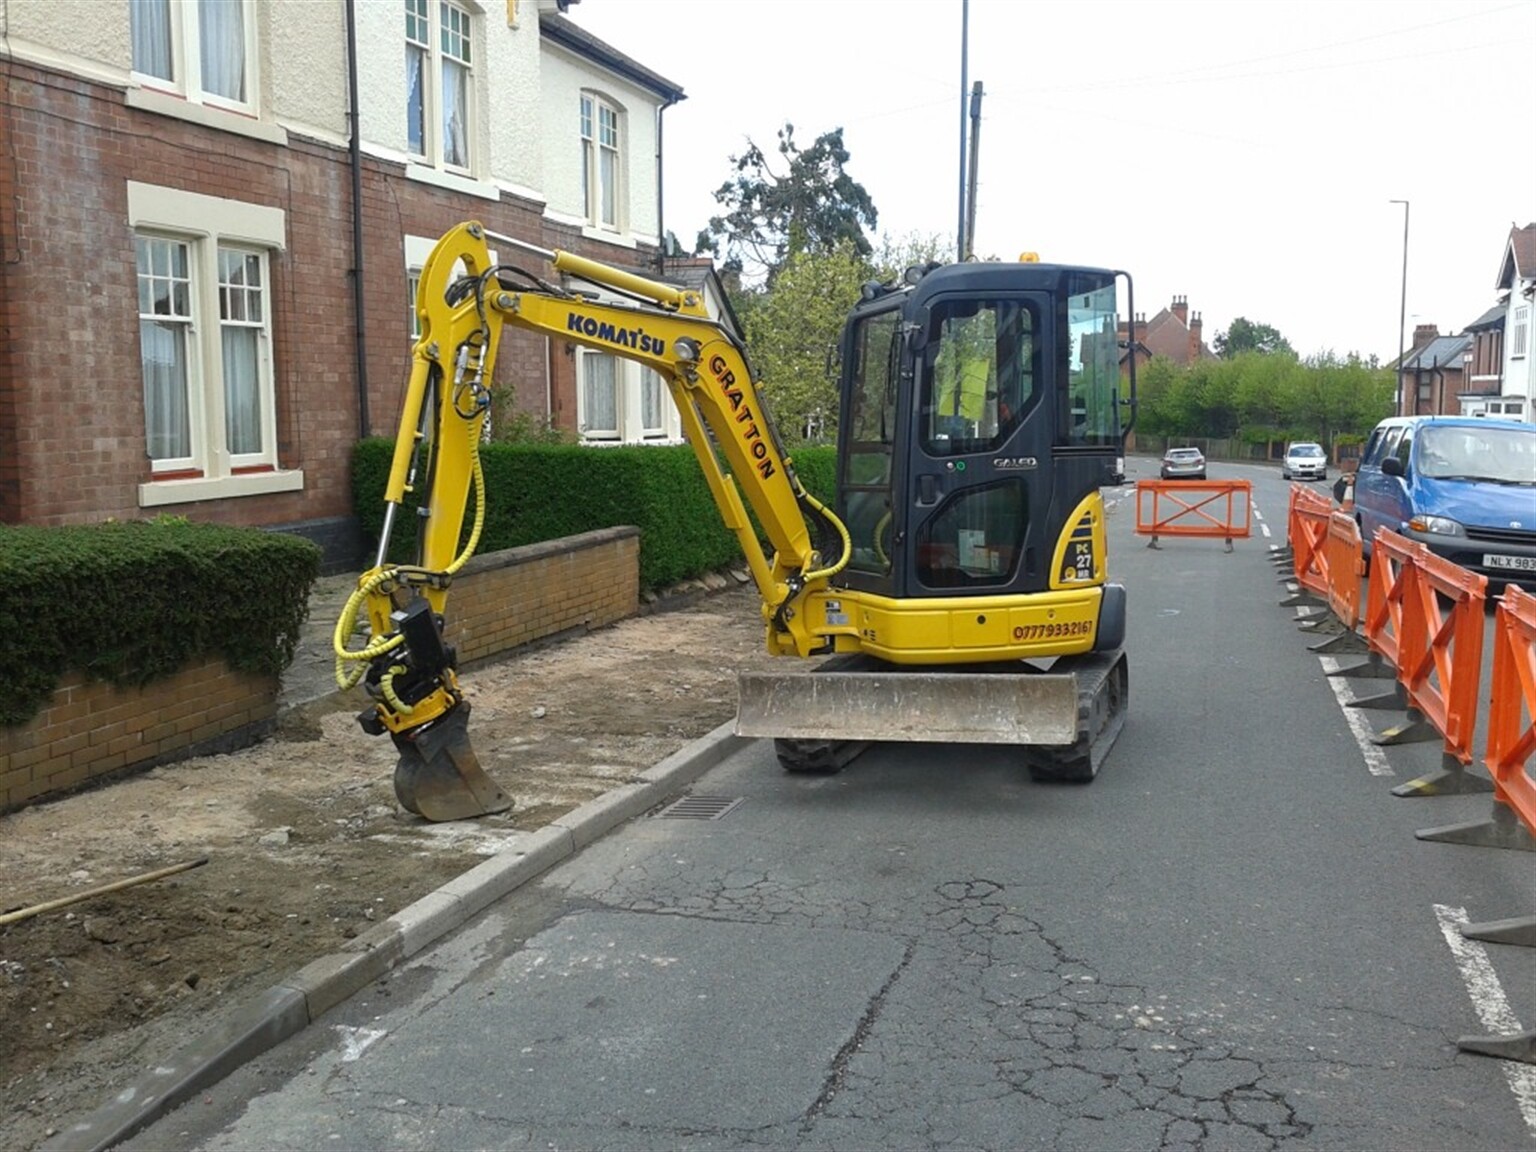 Komatsu PC27R digger Excavator 3 buckets and grab DUE IN SOON ! 